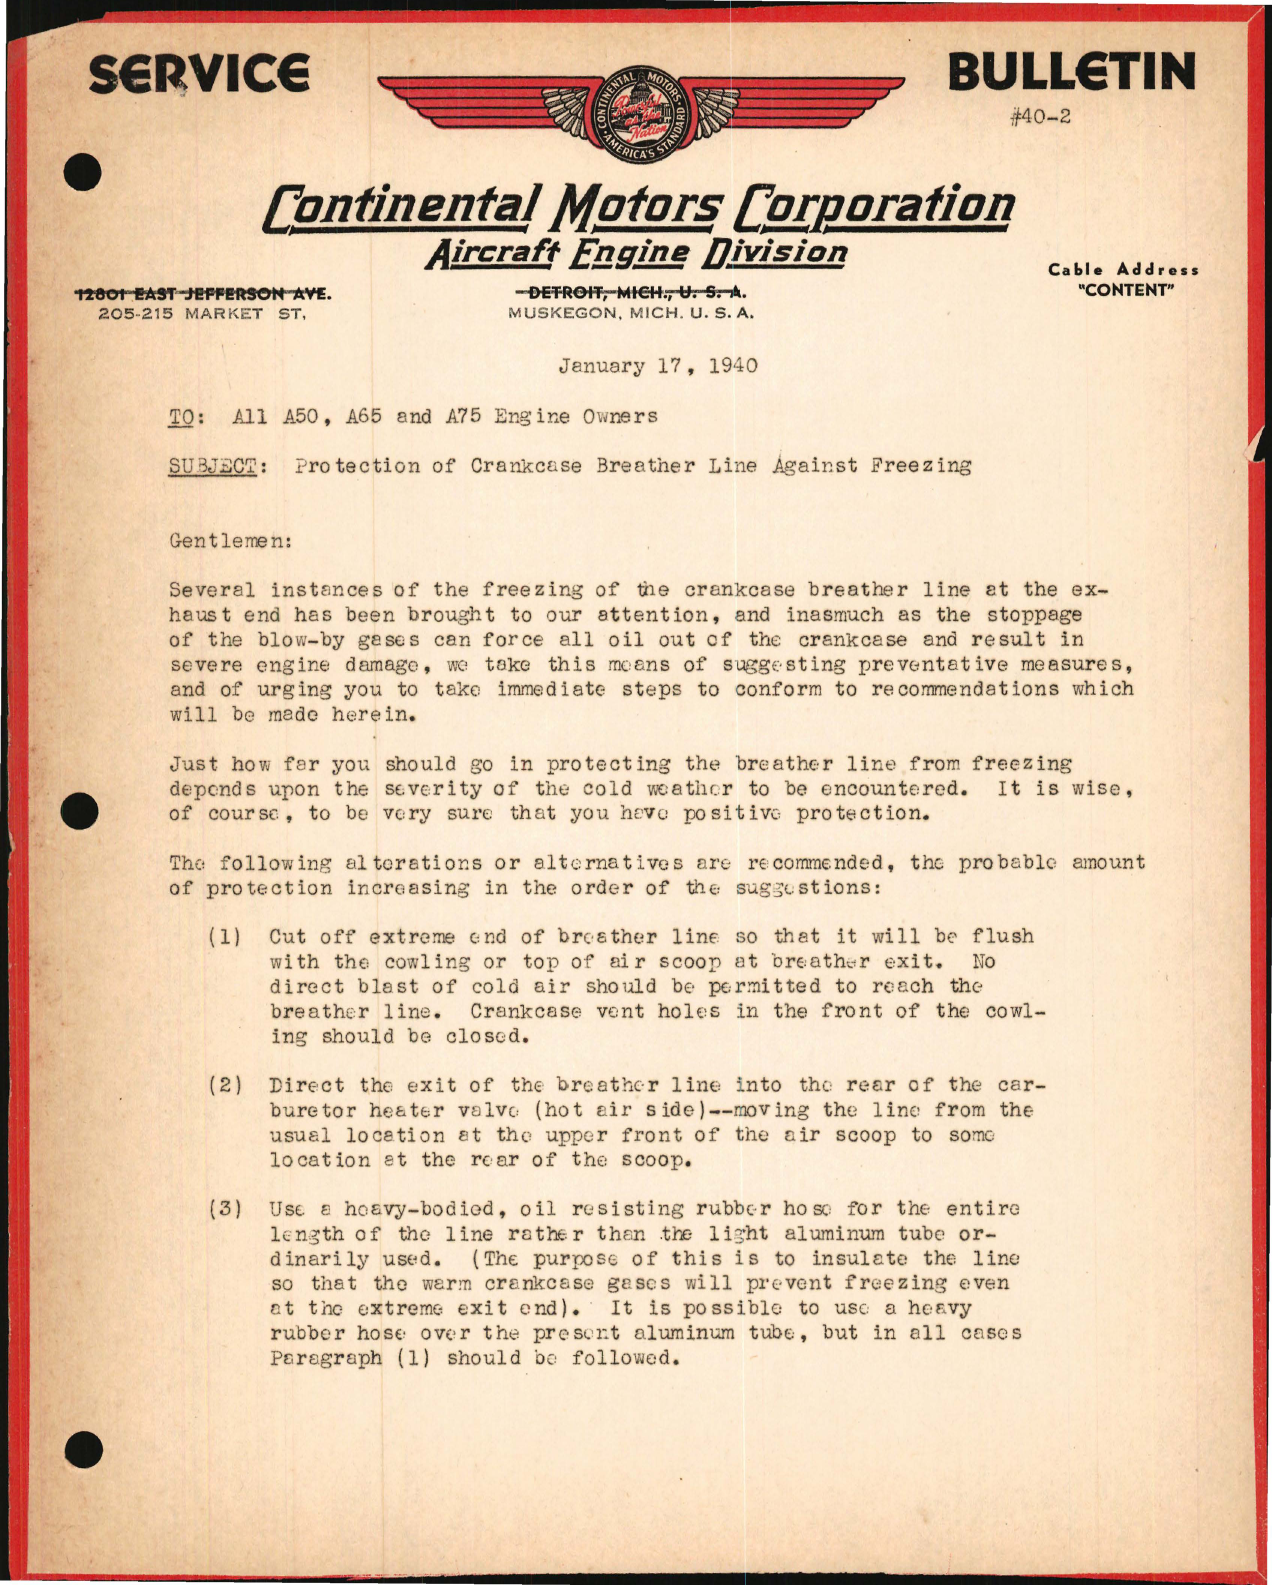 Sample page 1 from AirCorps Library document: Protection of Crankcase Breather Line Against Freezing in A50, A65, and A75 Engines